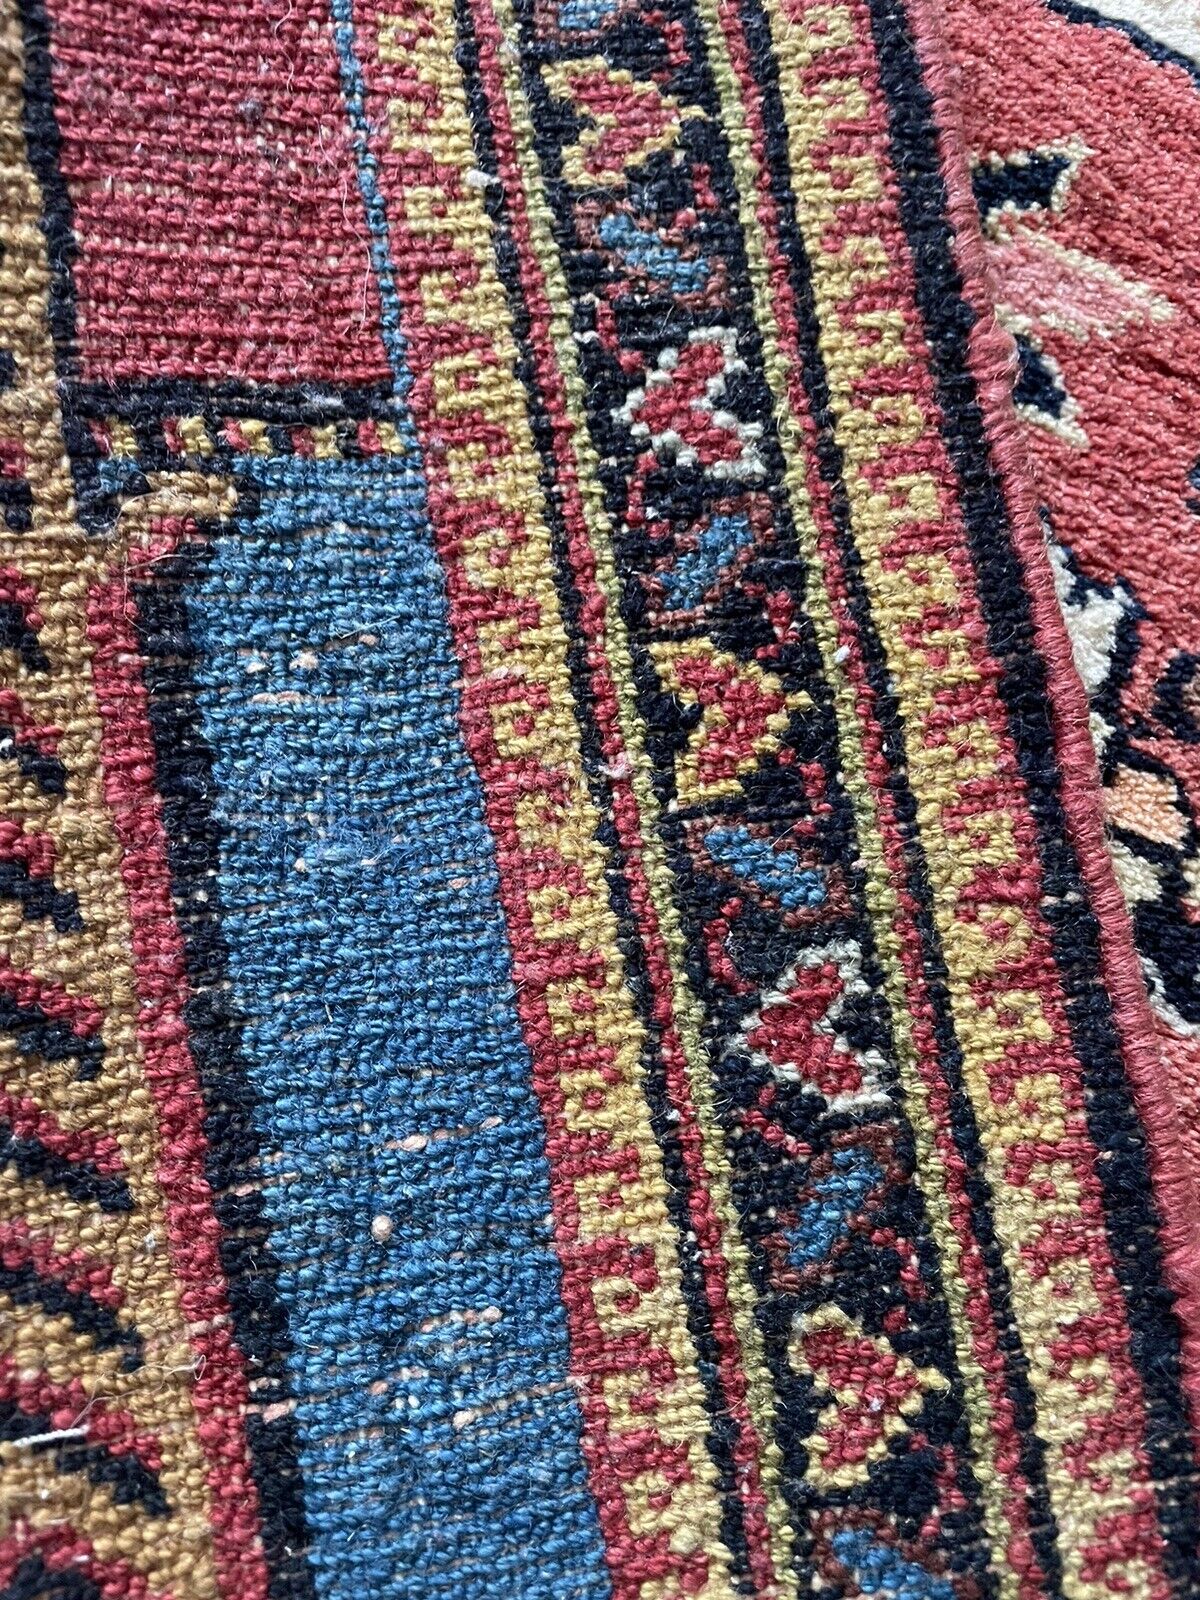 Back side of the Handmade Antique Persian Lilihan Collectible Rug - Underside view revealing the rug's construction and material.